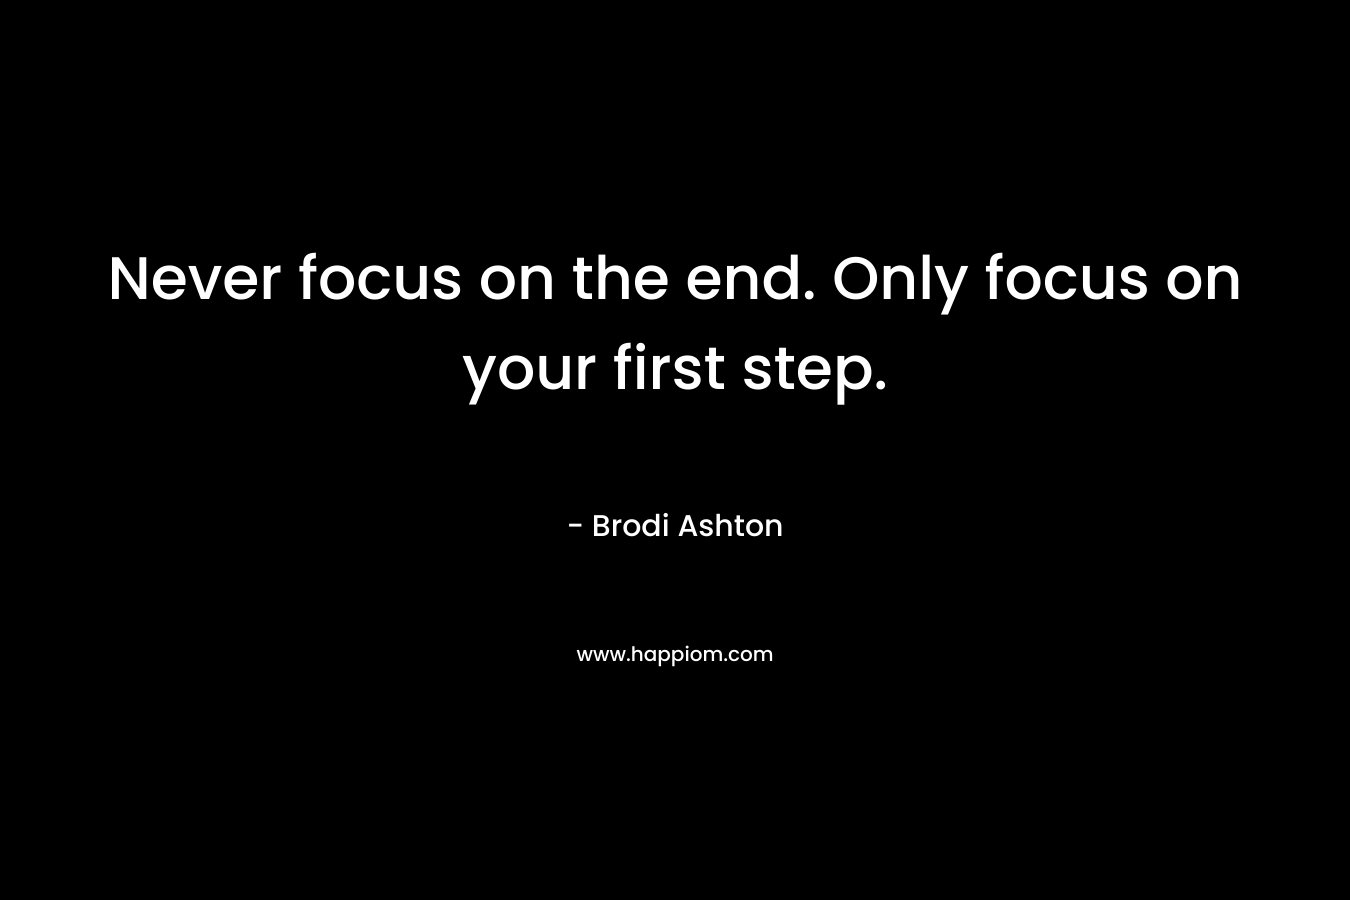 Never focus on the end. Only focus on your first step.